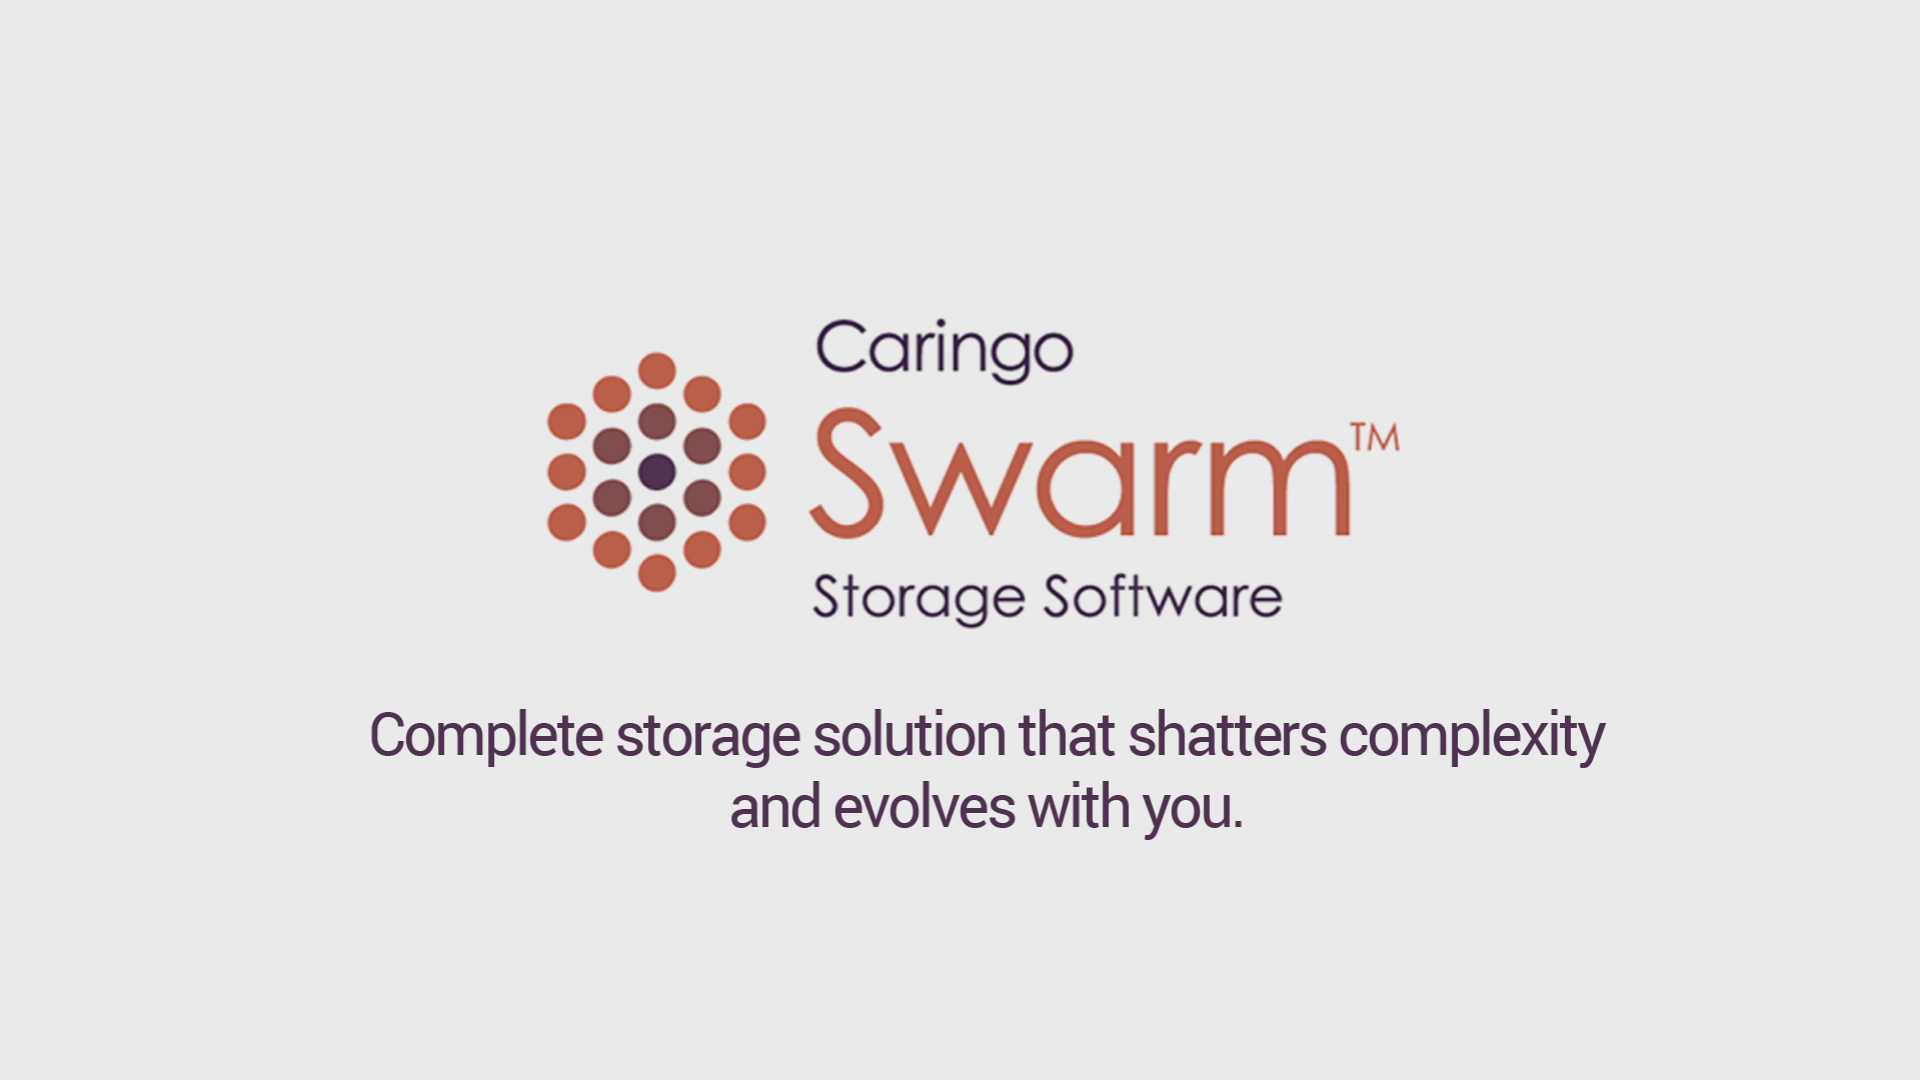 Caringo Swarm: Storage that Shatters Complexity